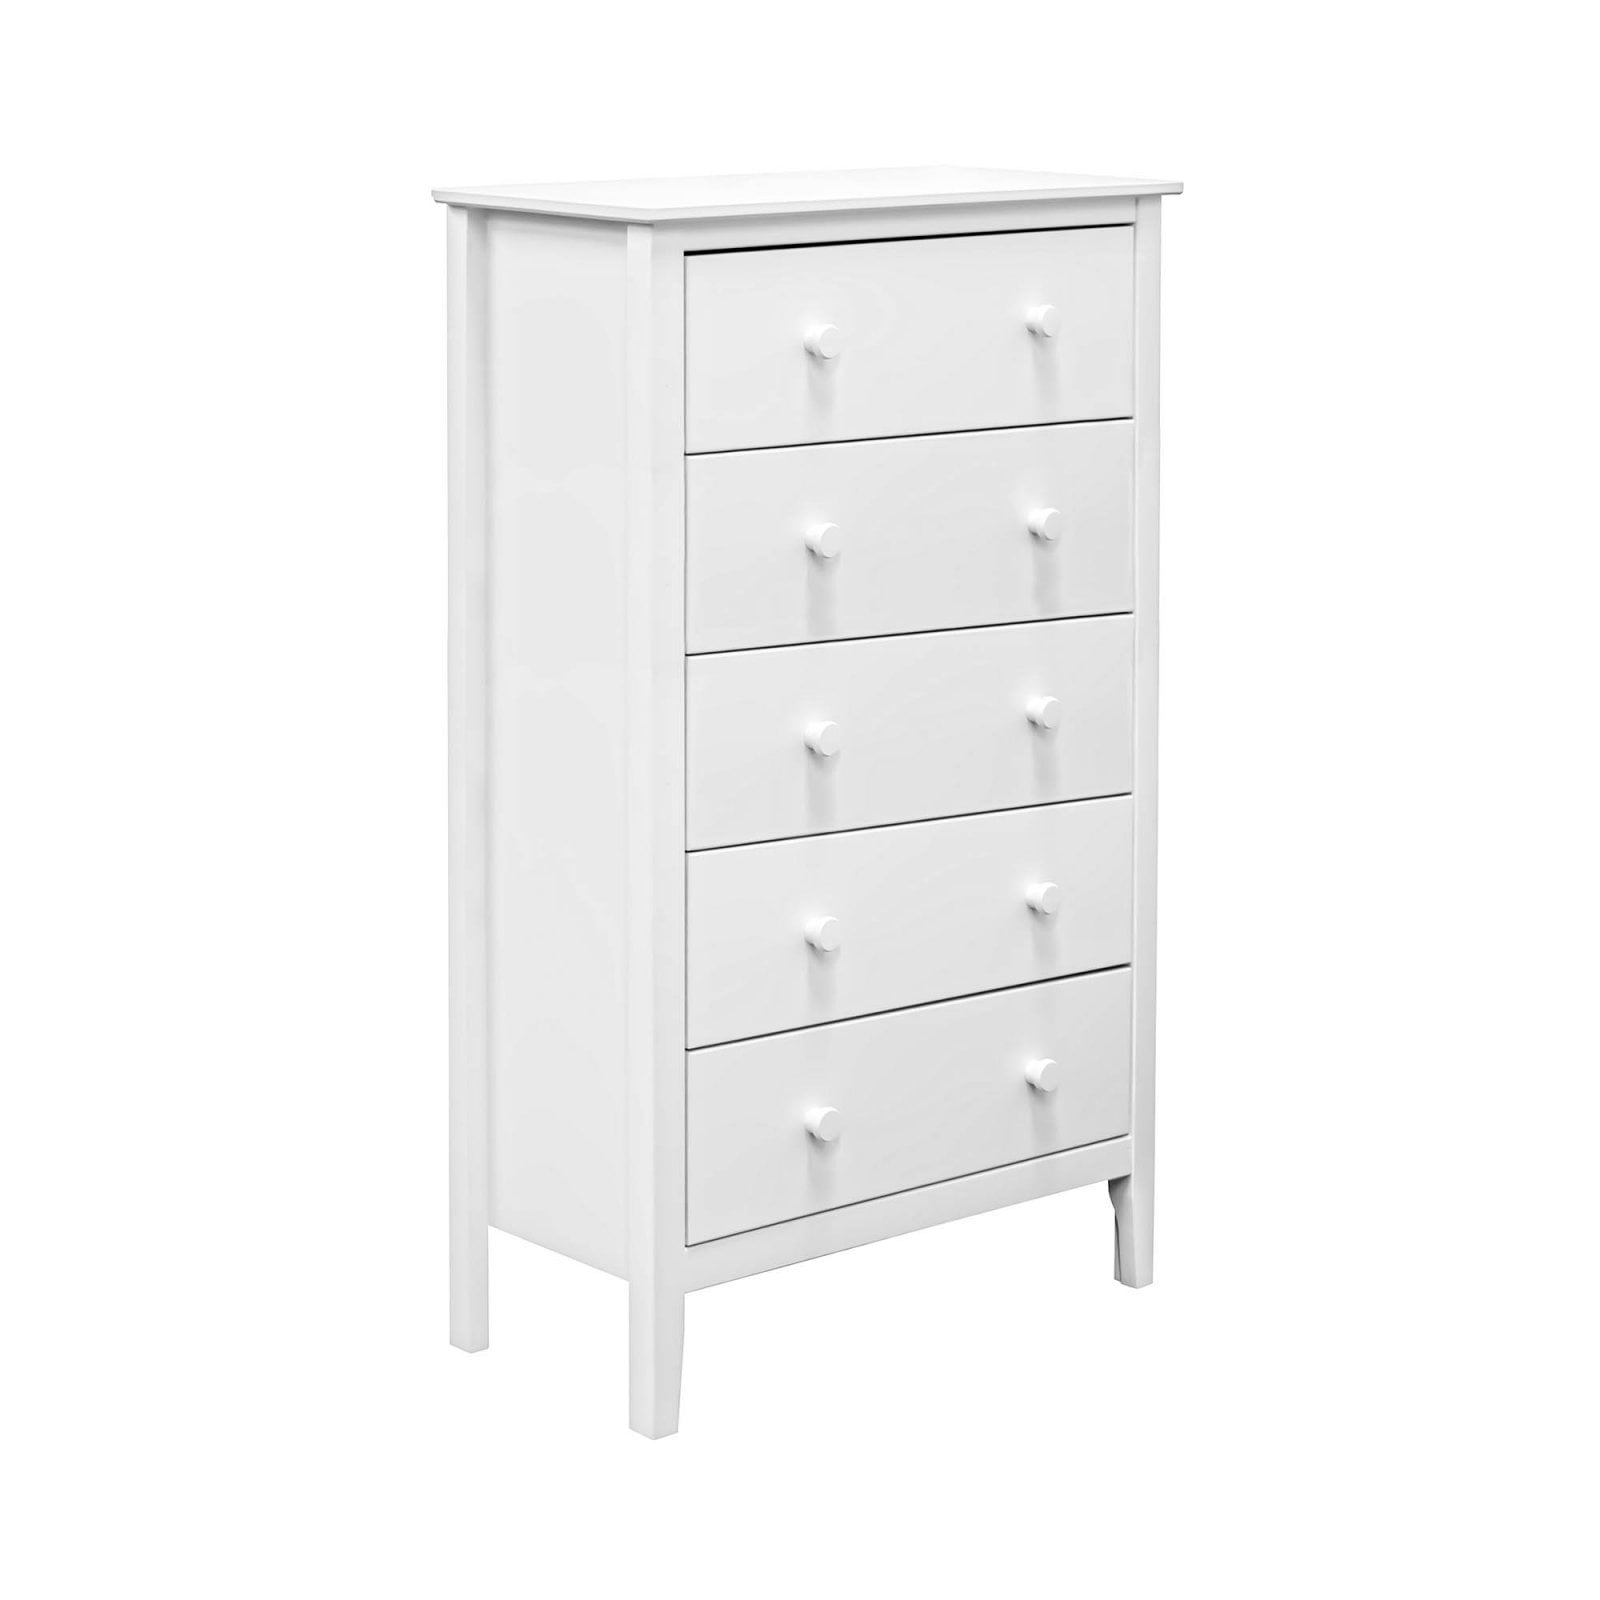 Picture of Adeptus Solid Wood 56114  Easy Pieces 5 Drawer Chest of Drawers - White